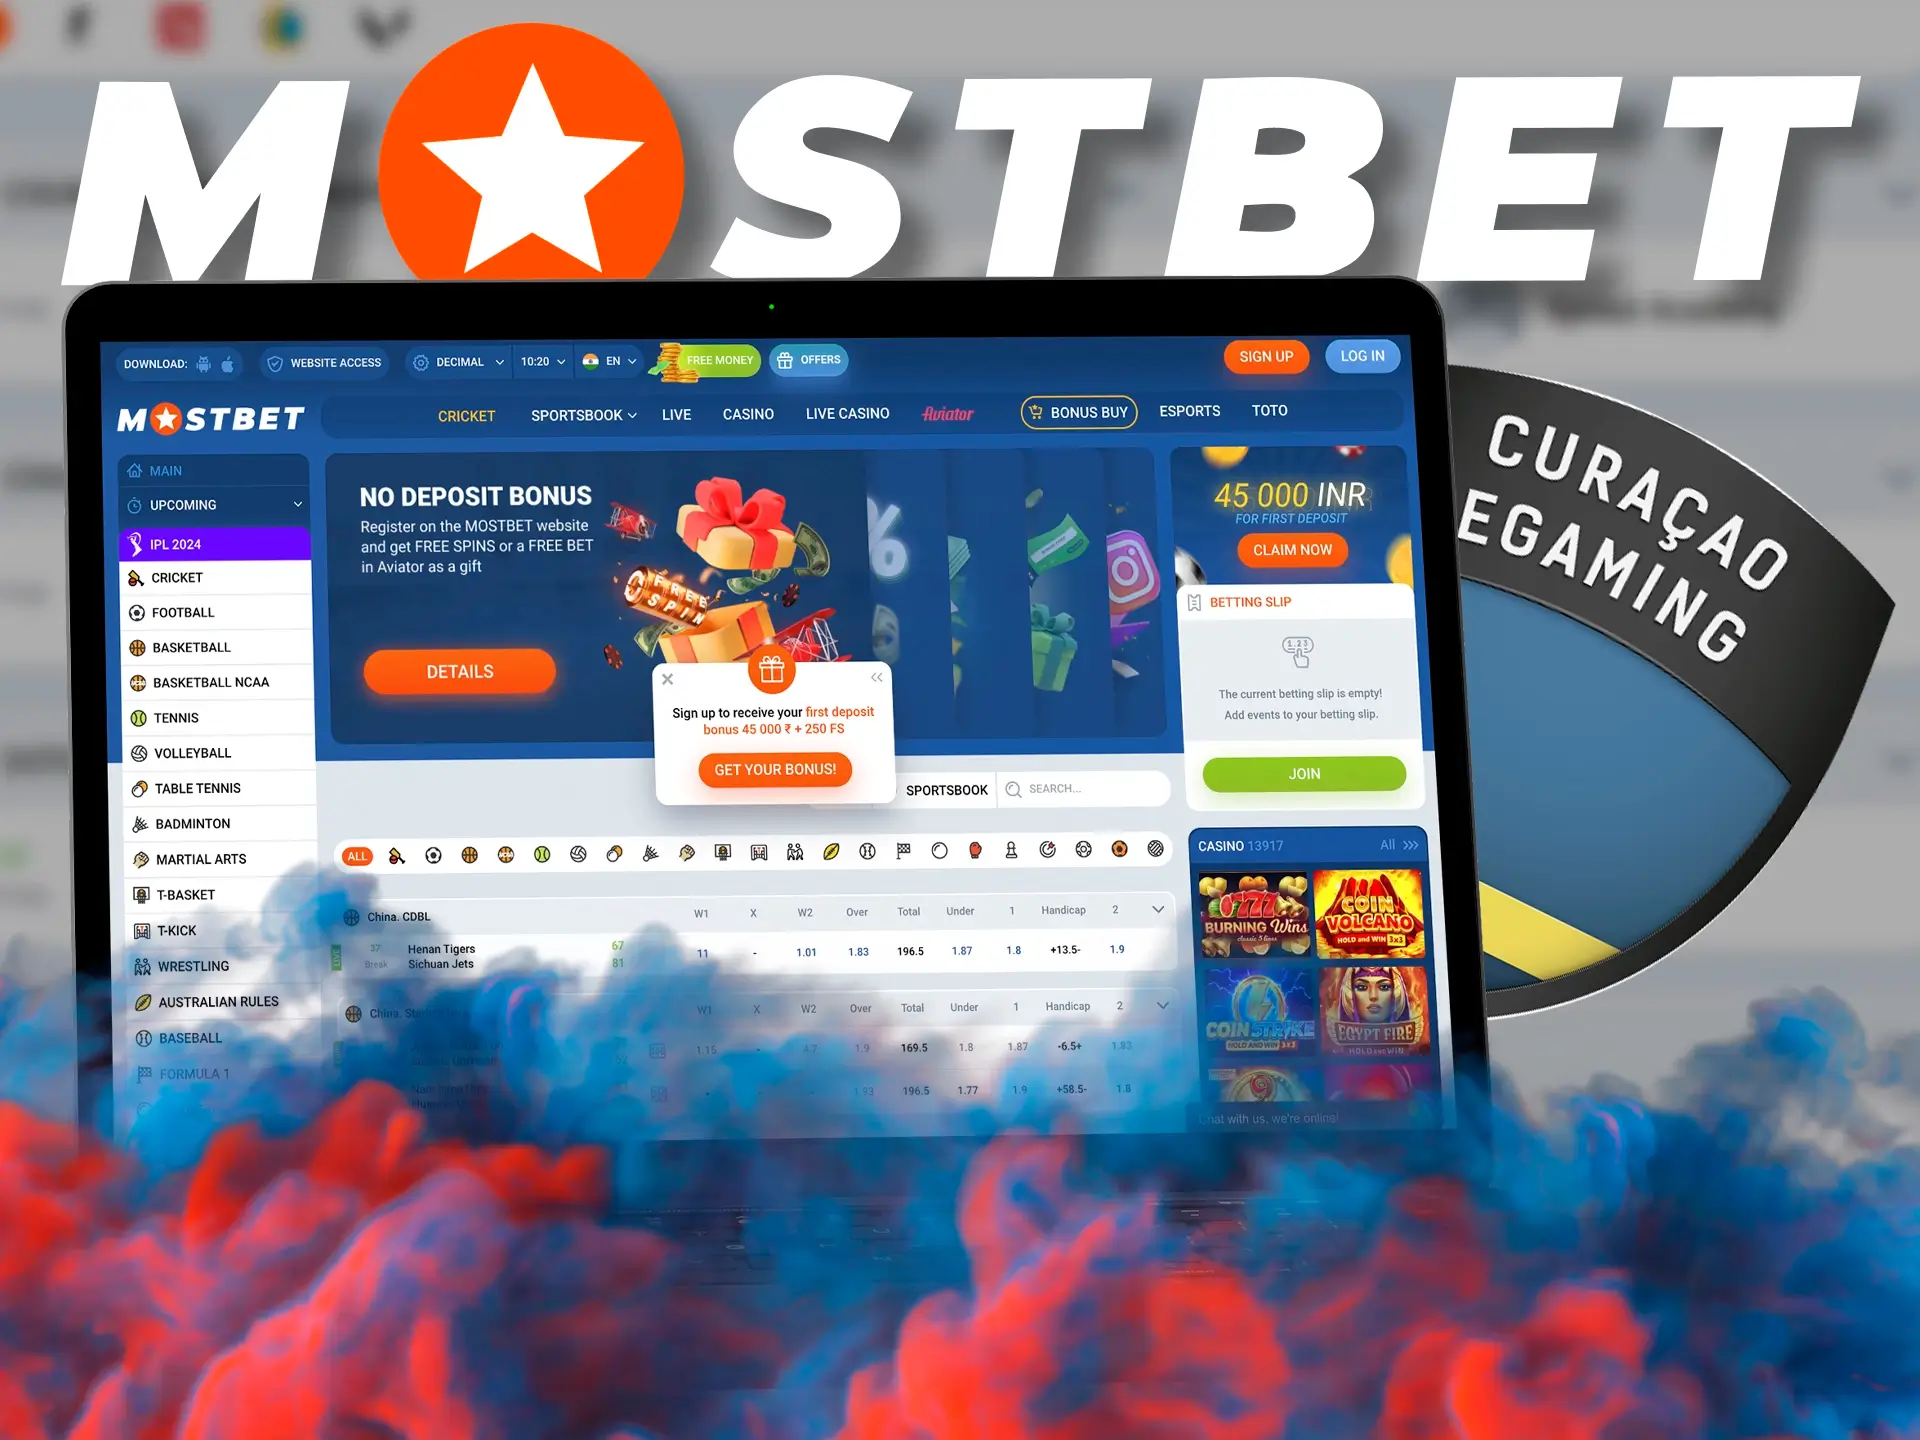 Use the best bookmaker Mostbet as it's regular customer support, fully legal casino and fast payouts.